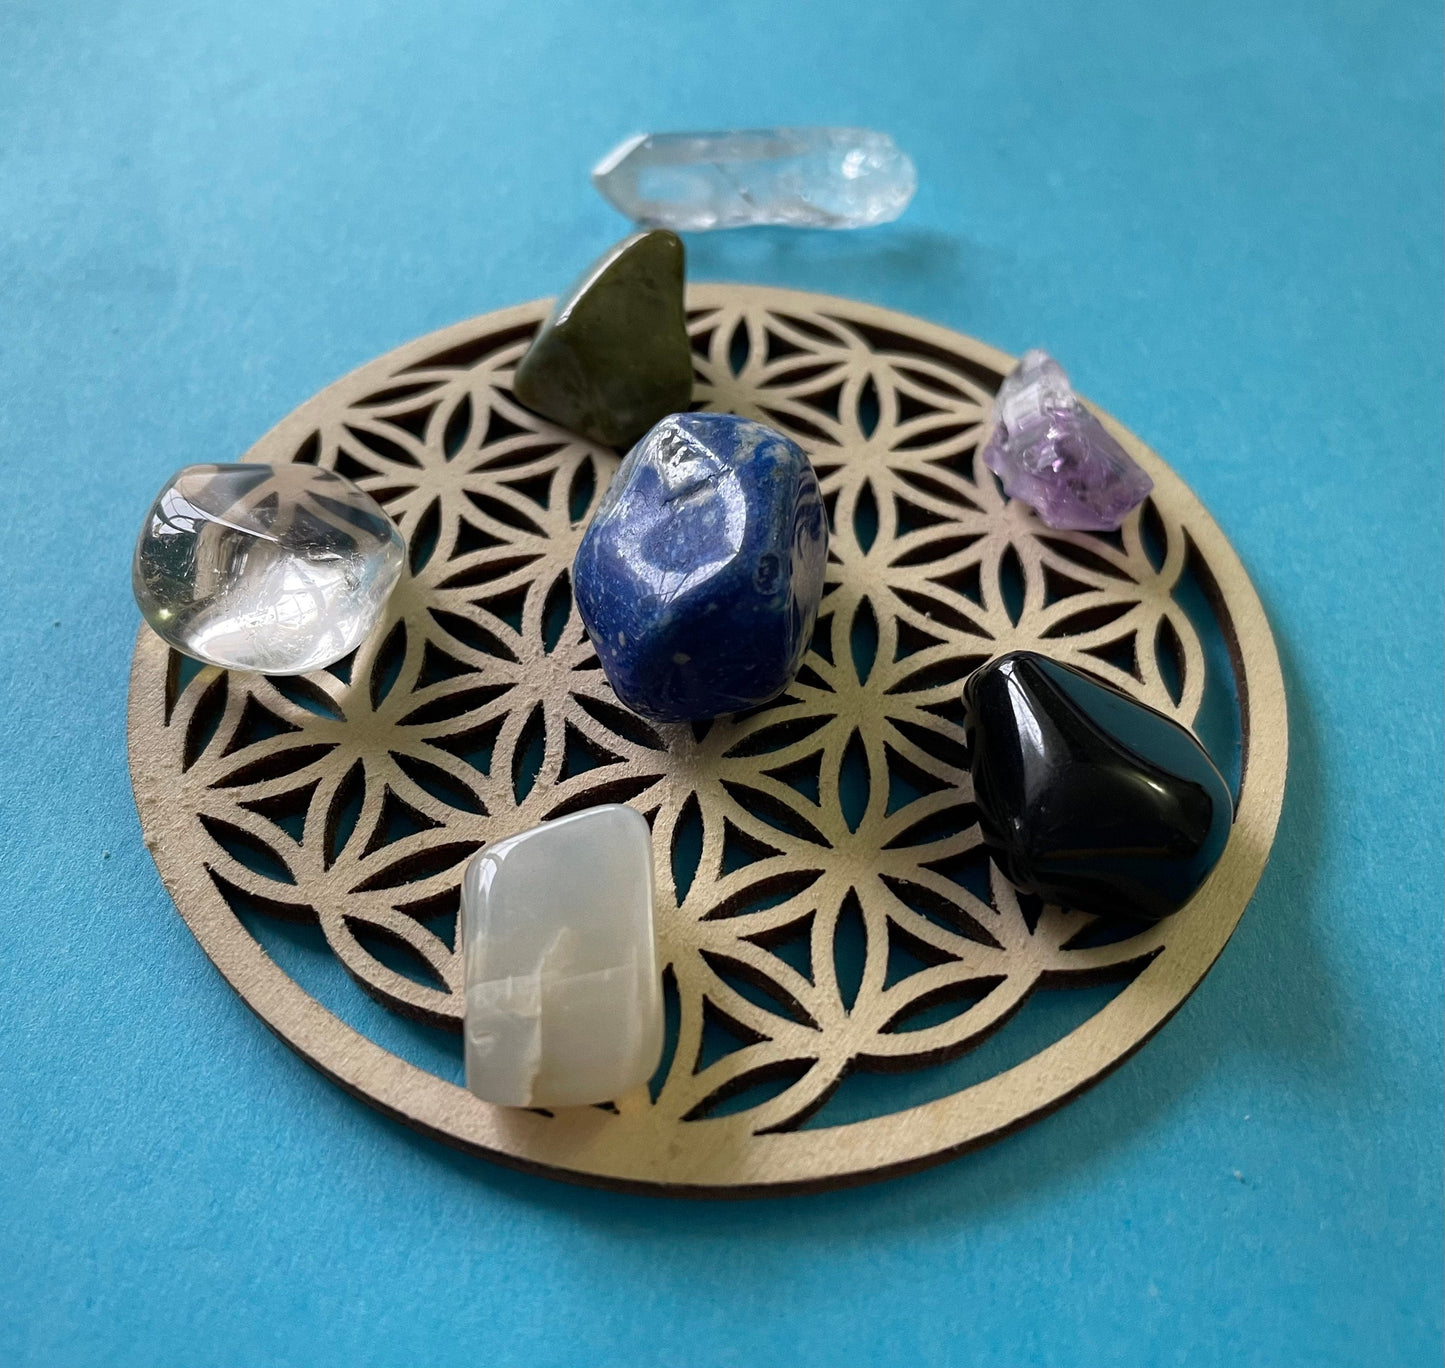 8 piece psychic empowerment healing crystal set with flower of life grid perfect for stocking stuffers